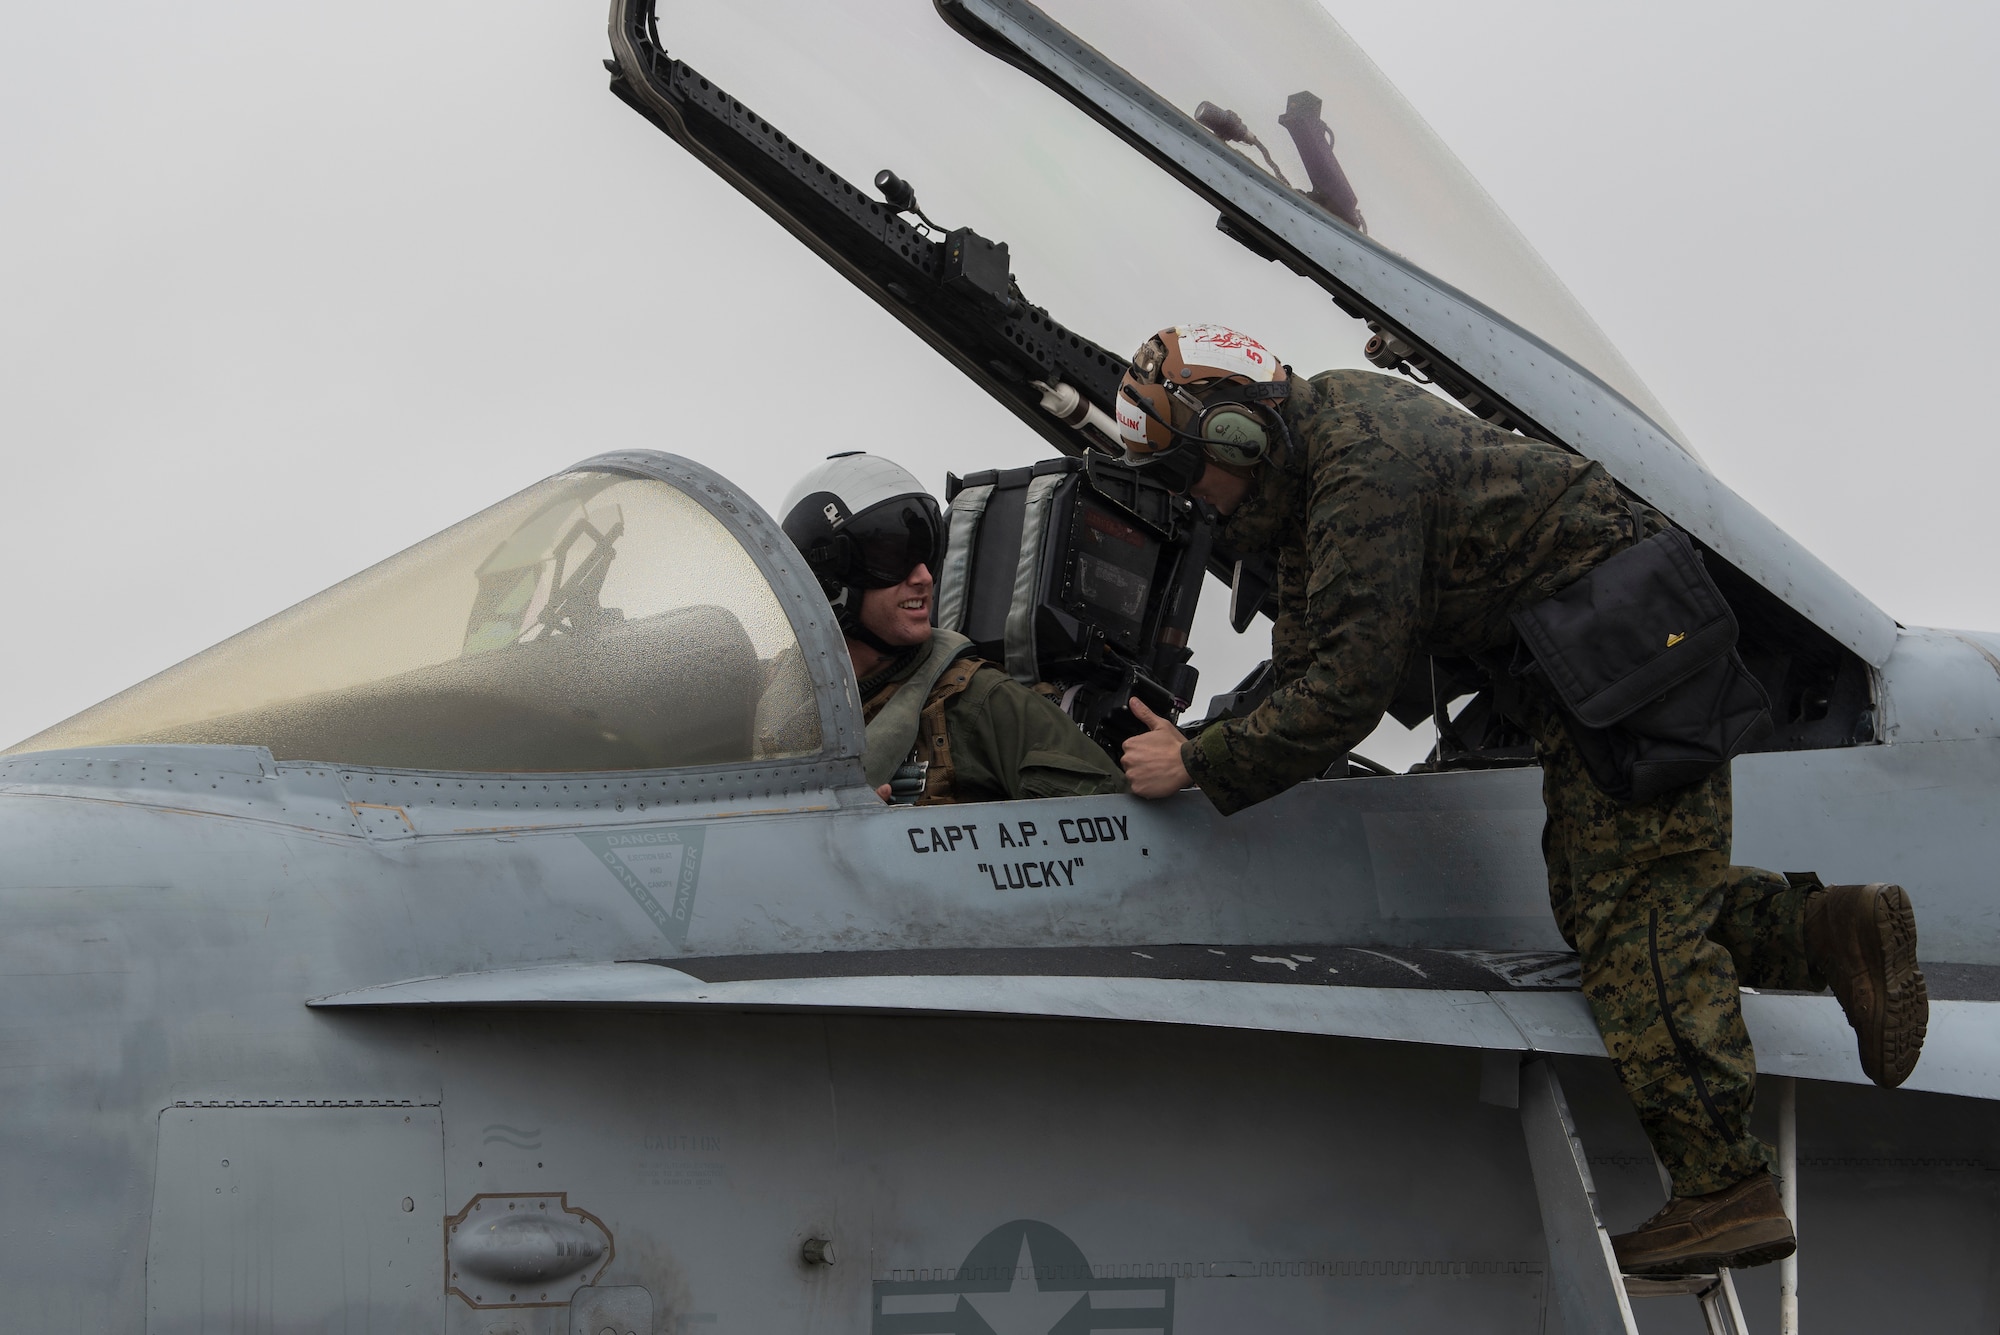 A U.S. Marine Corps F/A-18C Hornet pilot and crew chief talk before takeoff during joint exercise Winter Fury at Marine Corps Air Station Miramar, San Diego, Calif., Jan 17, 2019. Winter Fury involved both Marine F/A-18C Hornets, and Navy F-35C Lightning II’s, partnering with Air Force F-22 Raptors to perform air-to-air combat, while protecting ground assets.